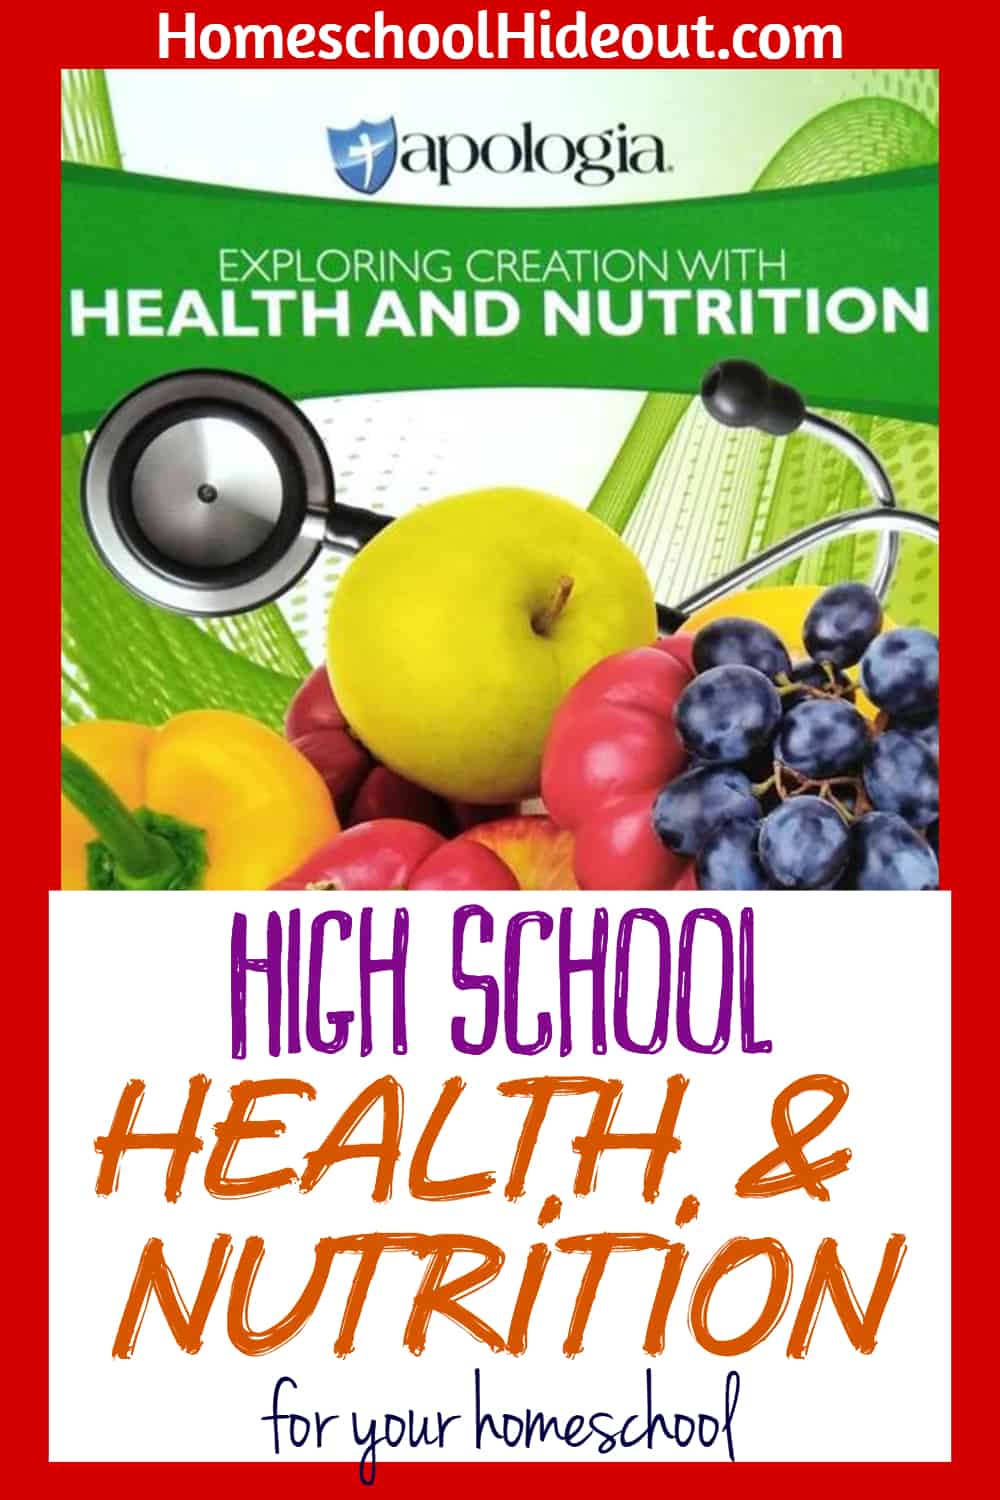 Finally! An affordable homeschool health course that covers it ALL! #apologia #homeschool #highschool #health #nutrition #mentalhealth #physicalhealth #teenagers